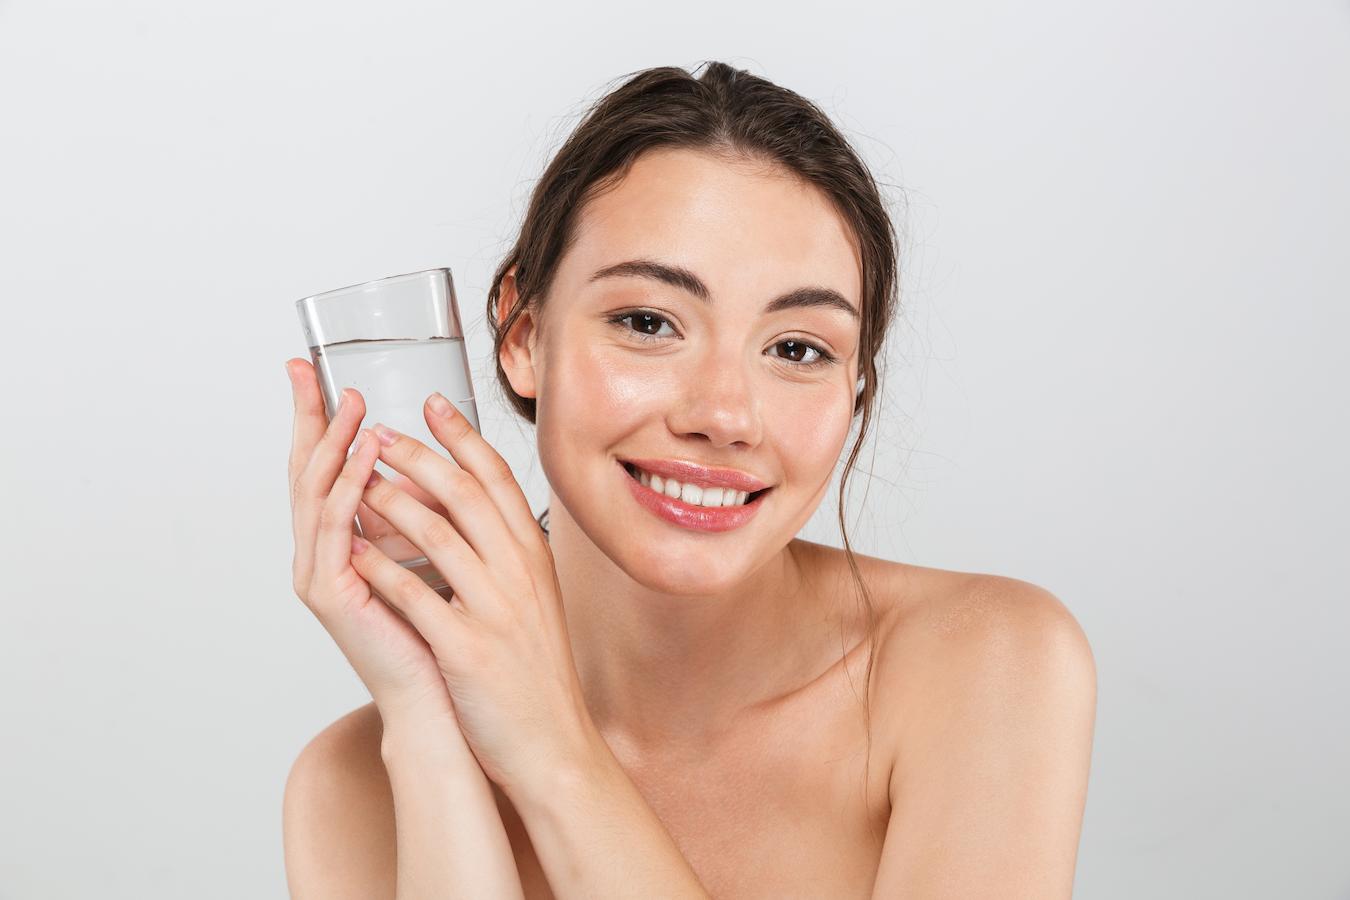 Choose skin care products that contain natural moisturizing factors like water and benefit your skin's health